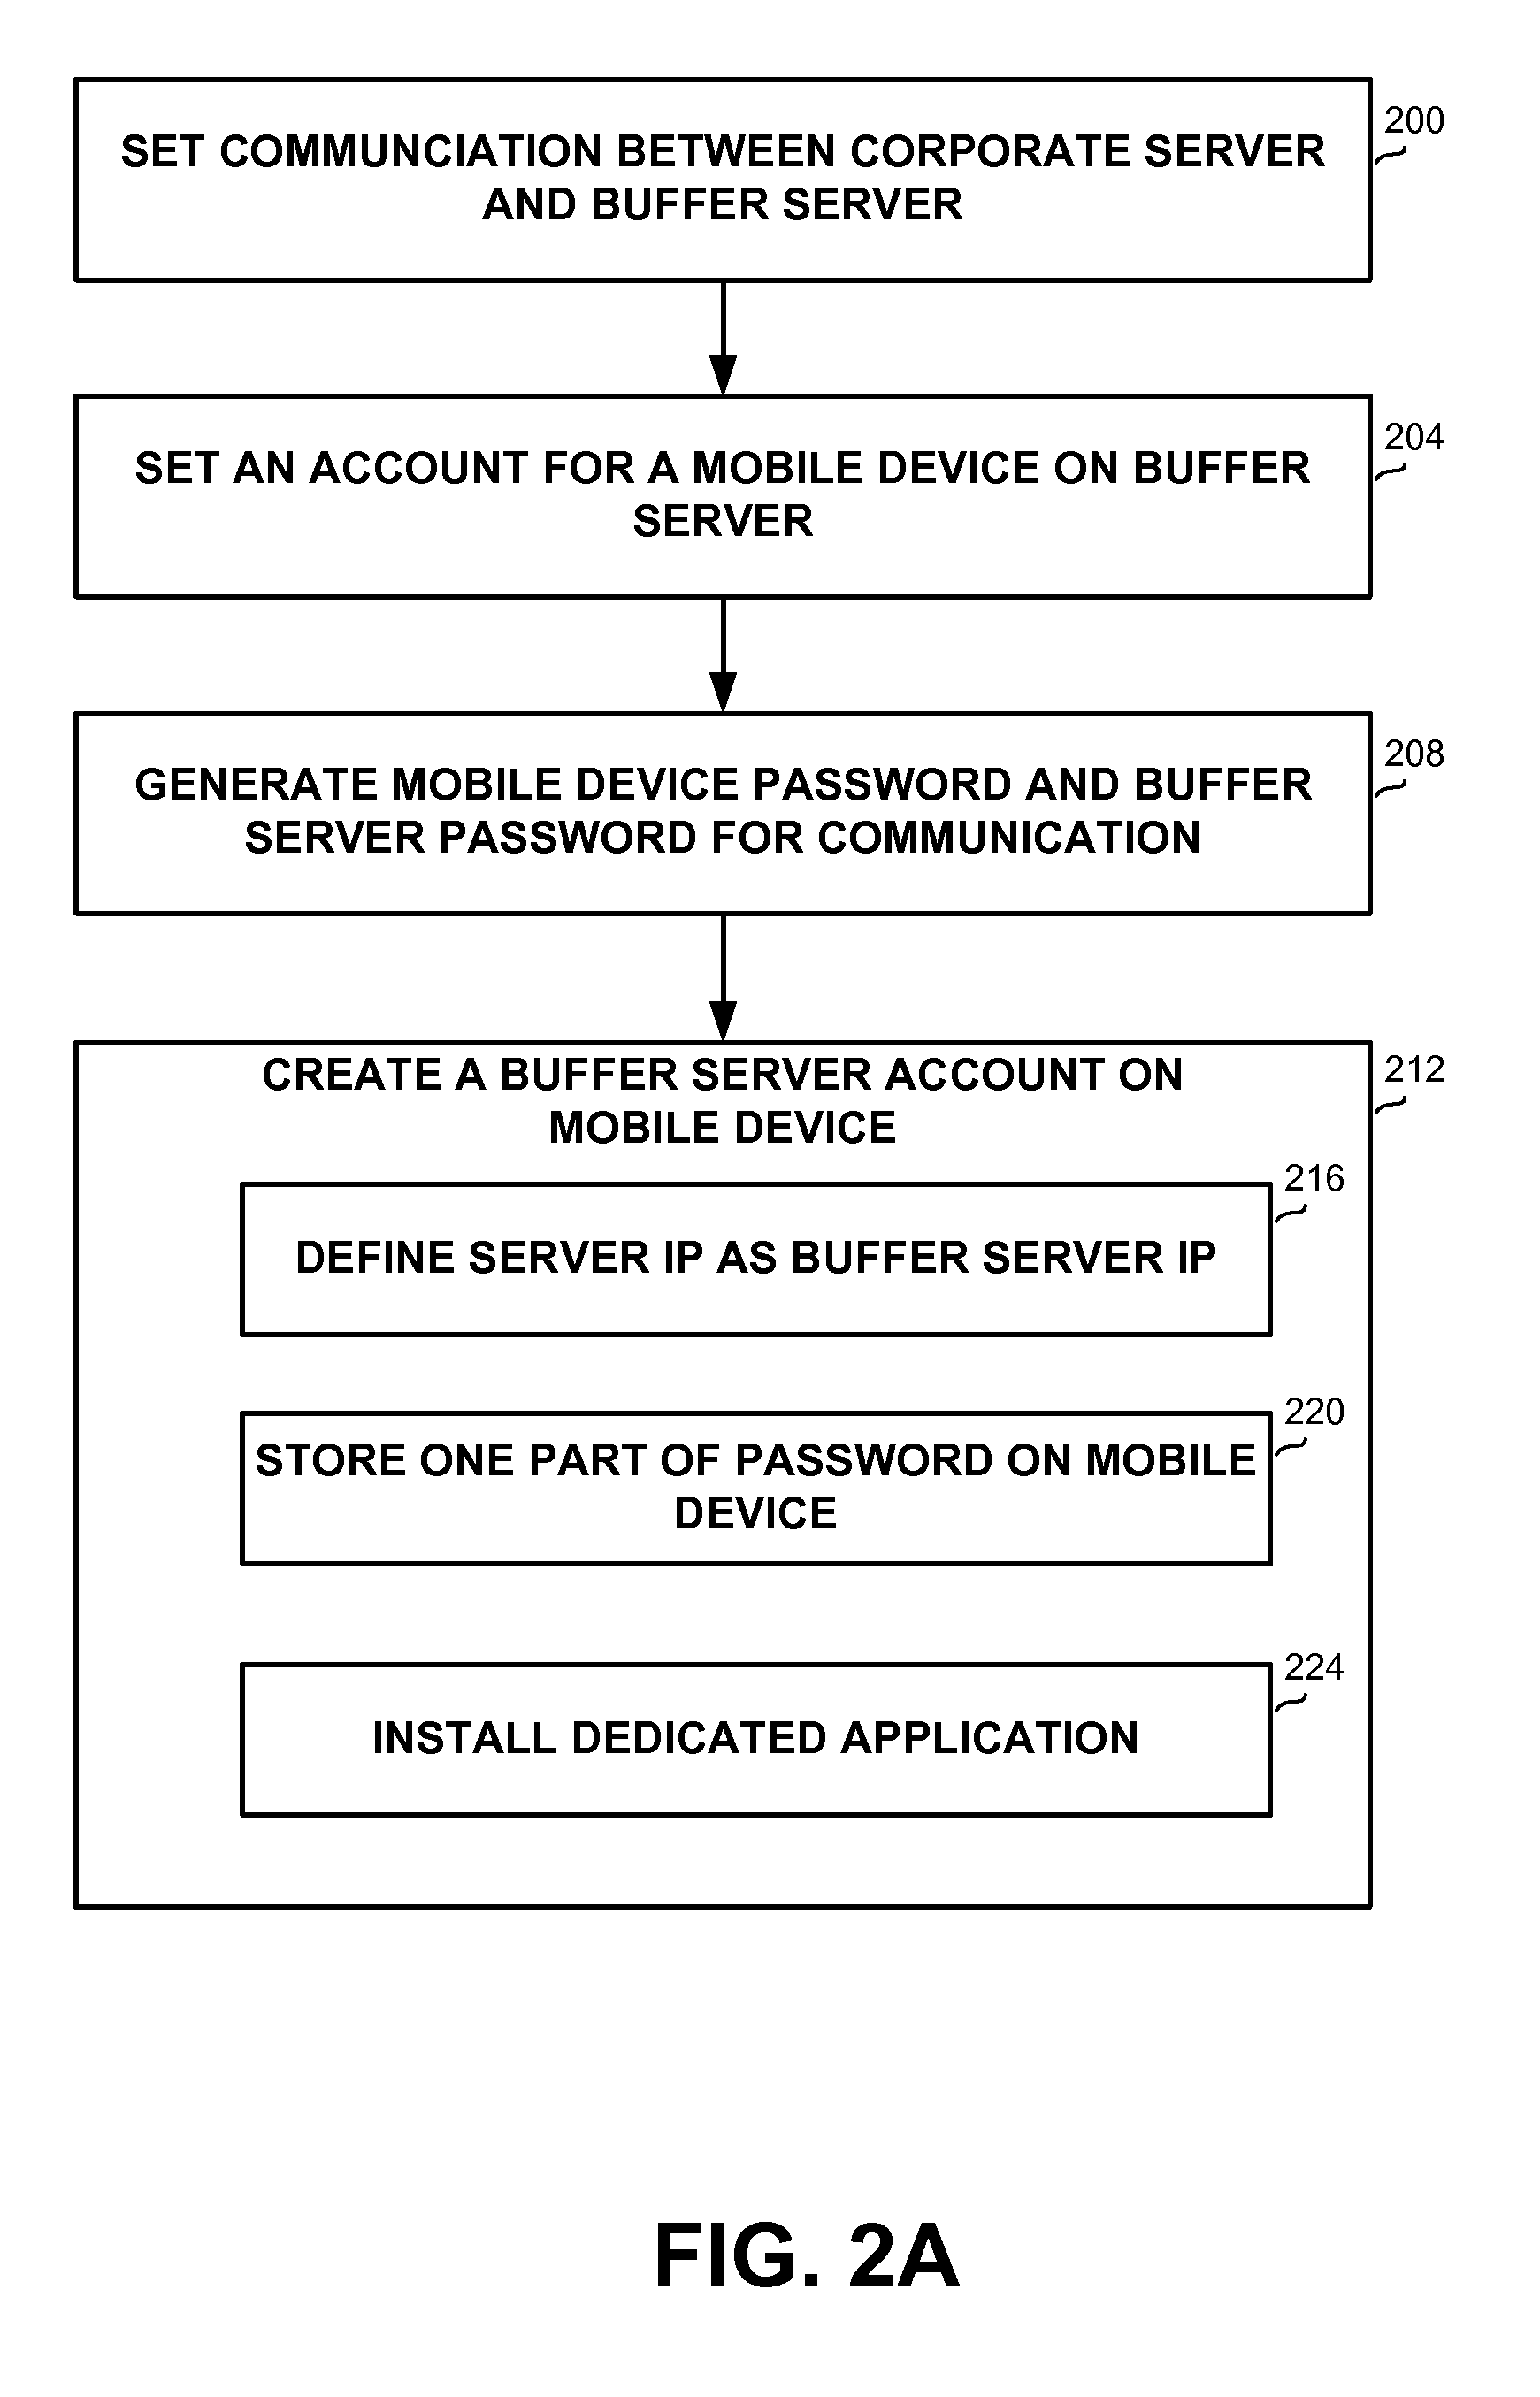 Method and Apparatus for Accessing Corporate Data from a Mobile Device